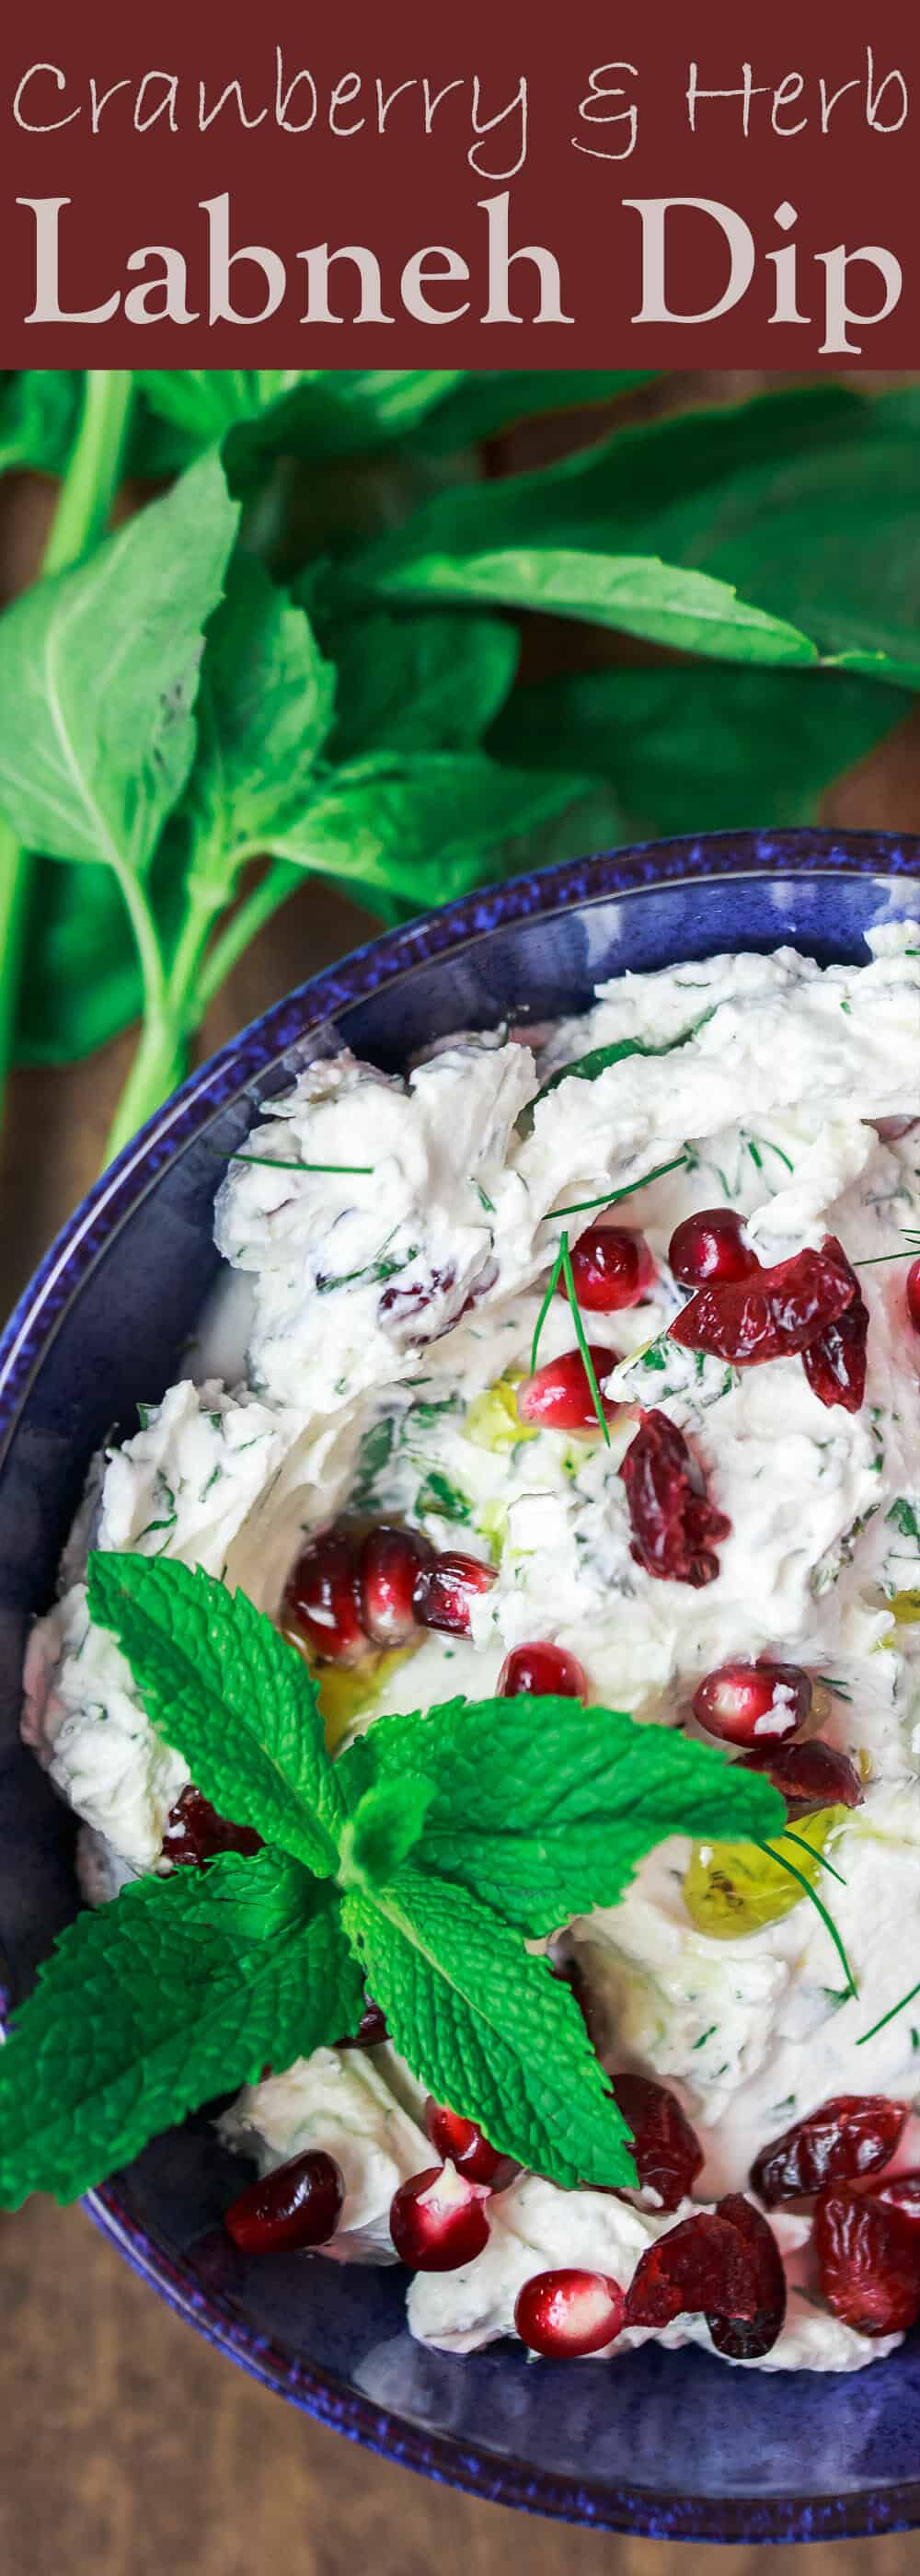 Cranberry and Herb Labneh Recipe | The Mediterranean Dish. Creamy labneh cheese makes the perfect Mediterranean party dip with loads of fresh herbs and dried cranberries. This labneh recipe comes with a homemade pita chips recipe as well! So easy. See it on TheMediterraneanDish.com #labneh #labnehdip #cheesedip #mediterraneanrecipe 